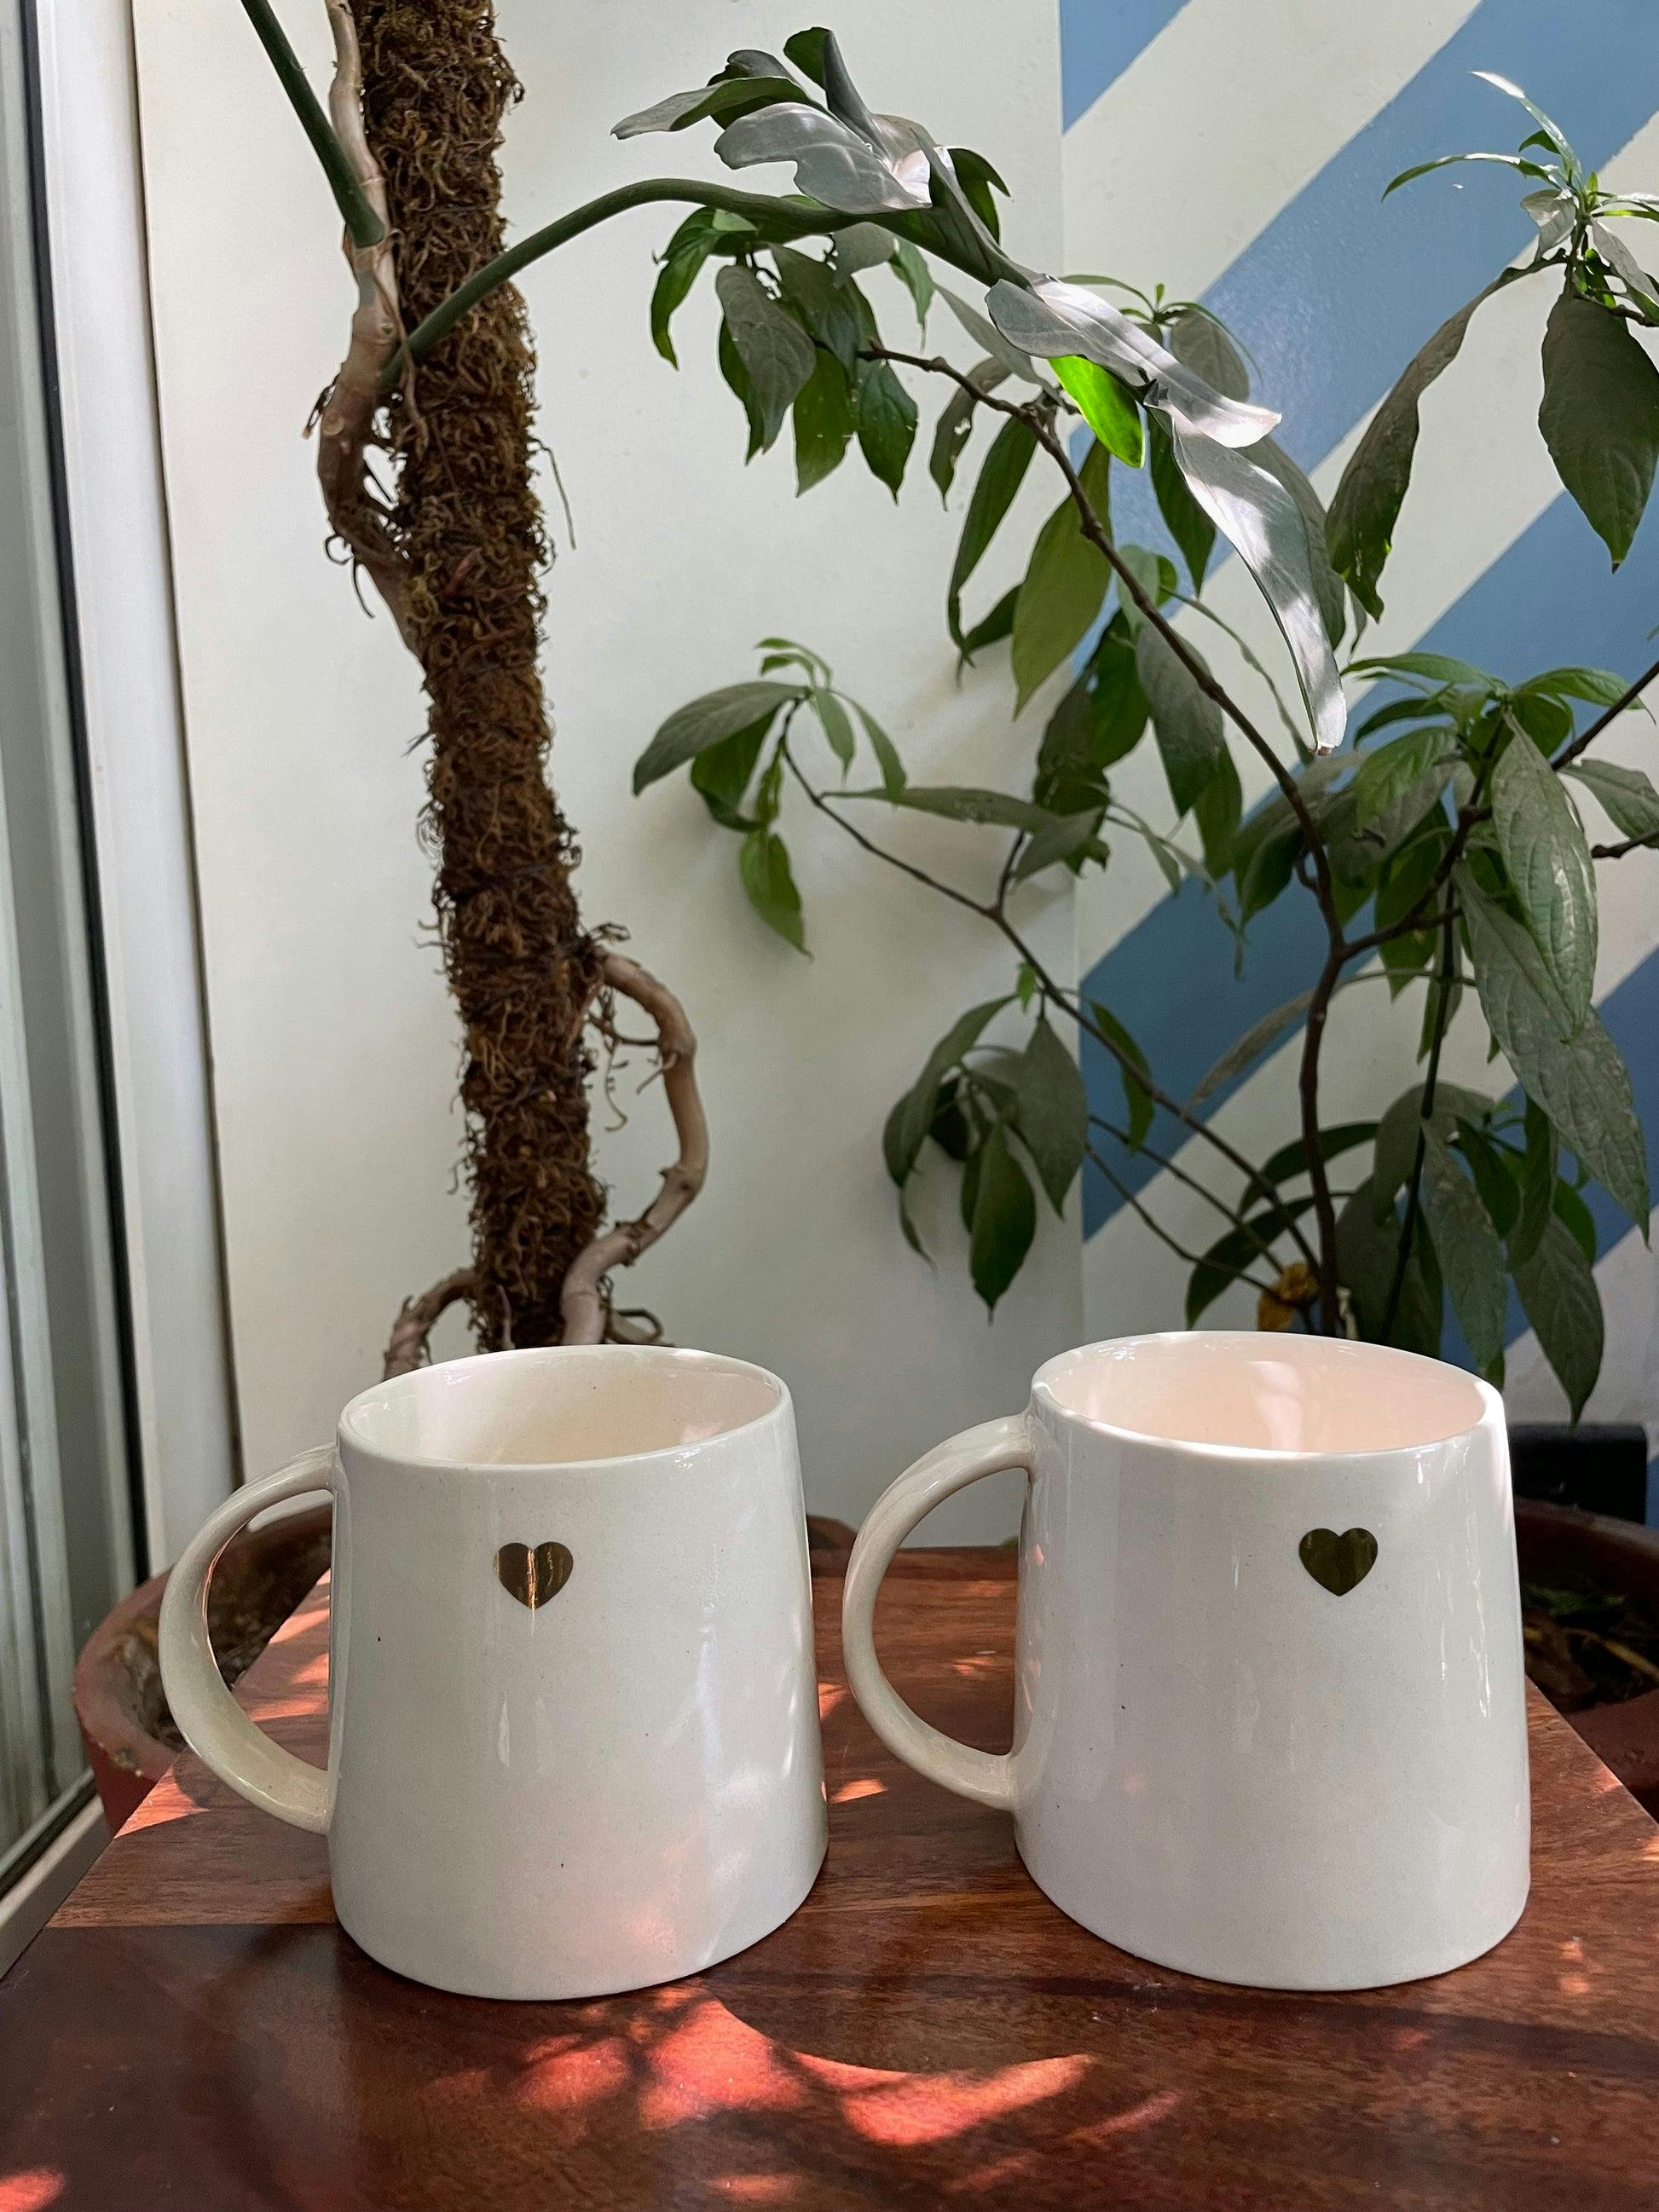 Heart Me Gilt Mug - Set of 2, a product by Oh Yay project